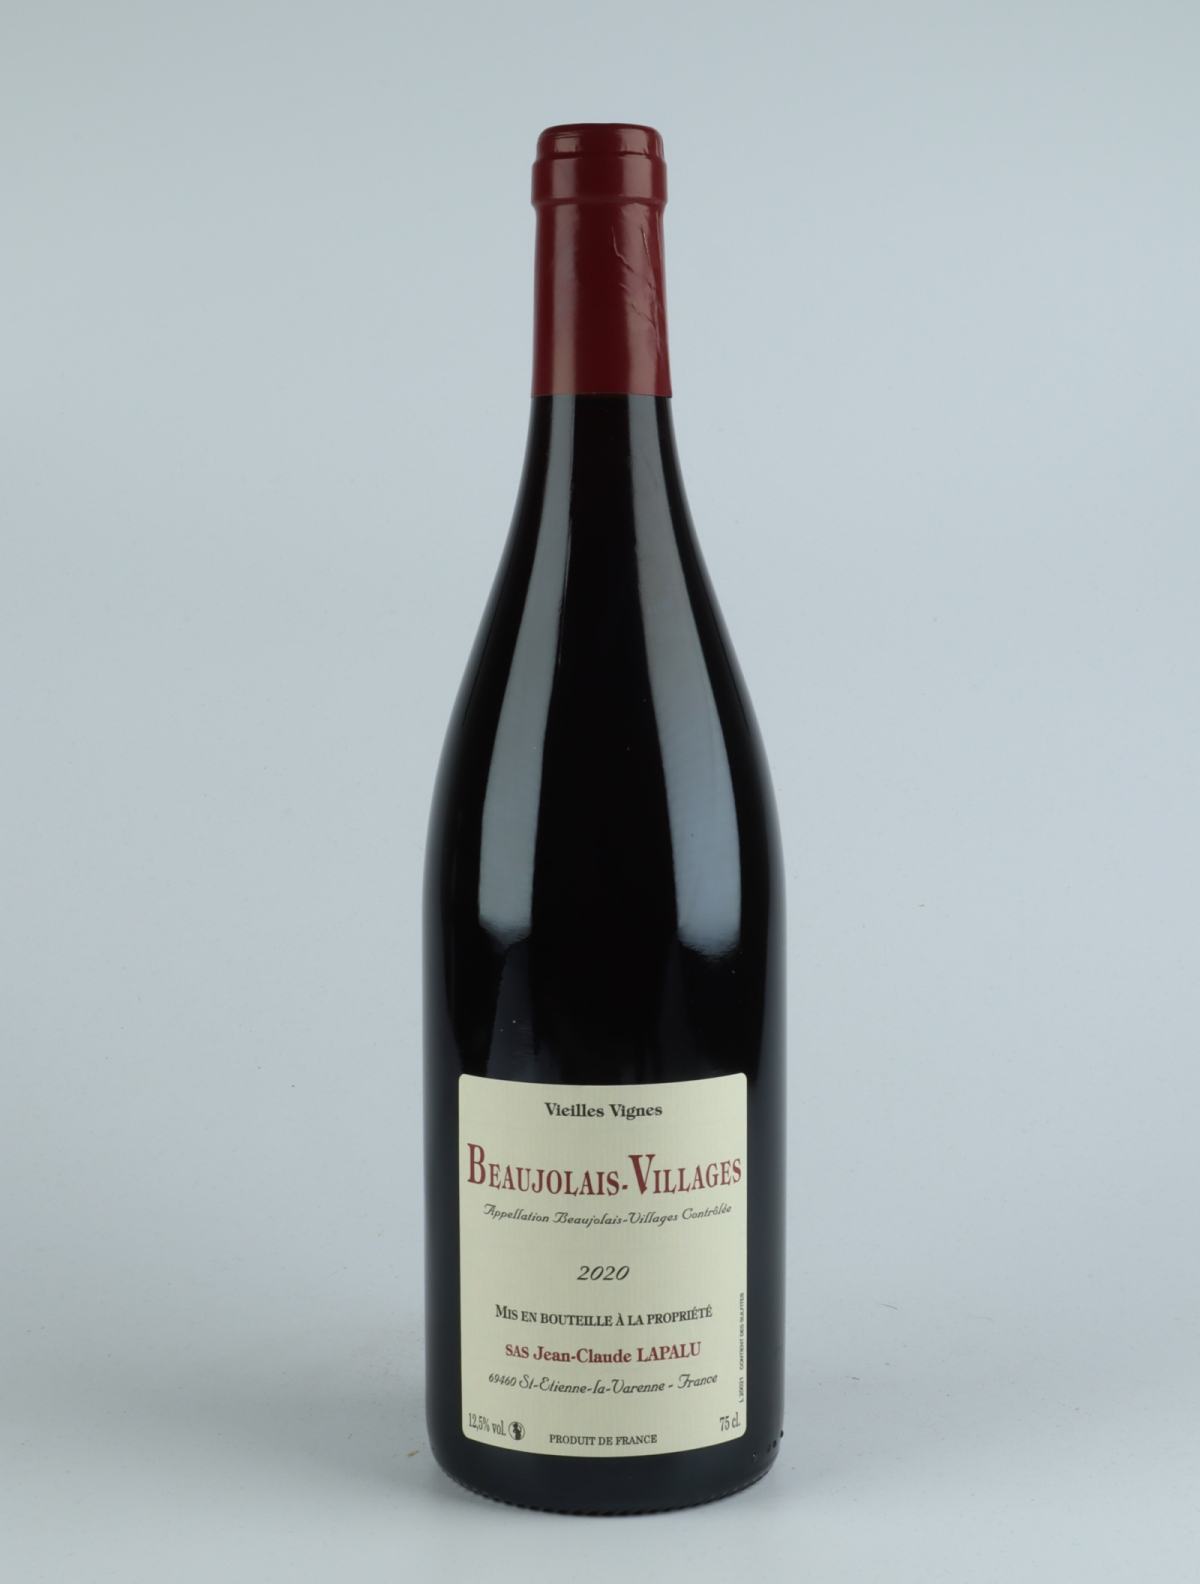 A bottle 2020 Beaujolais Villages - Vieilles Vignes Red wine from Jean-Claude Lapalu, Beaujolais in France